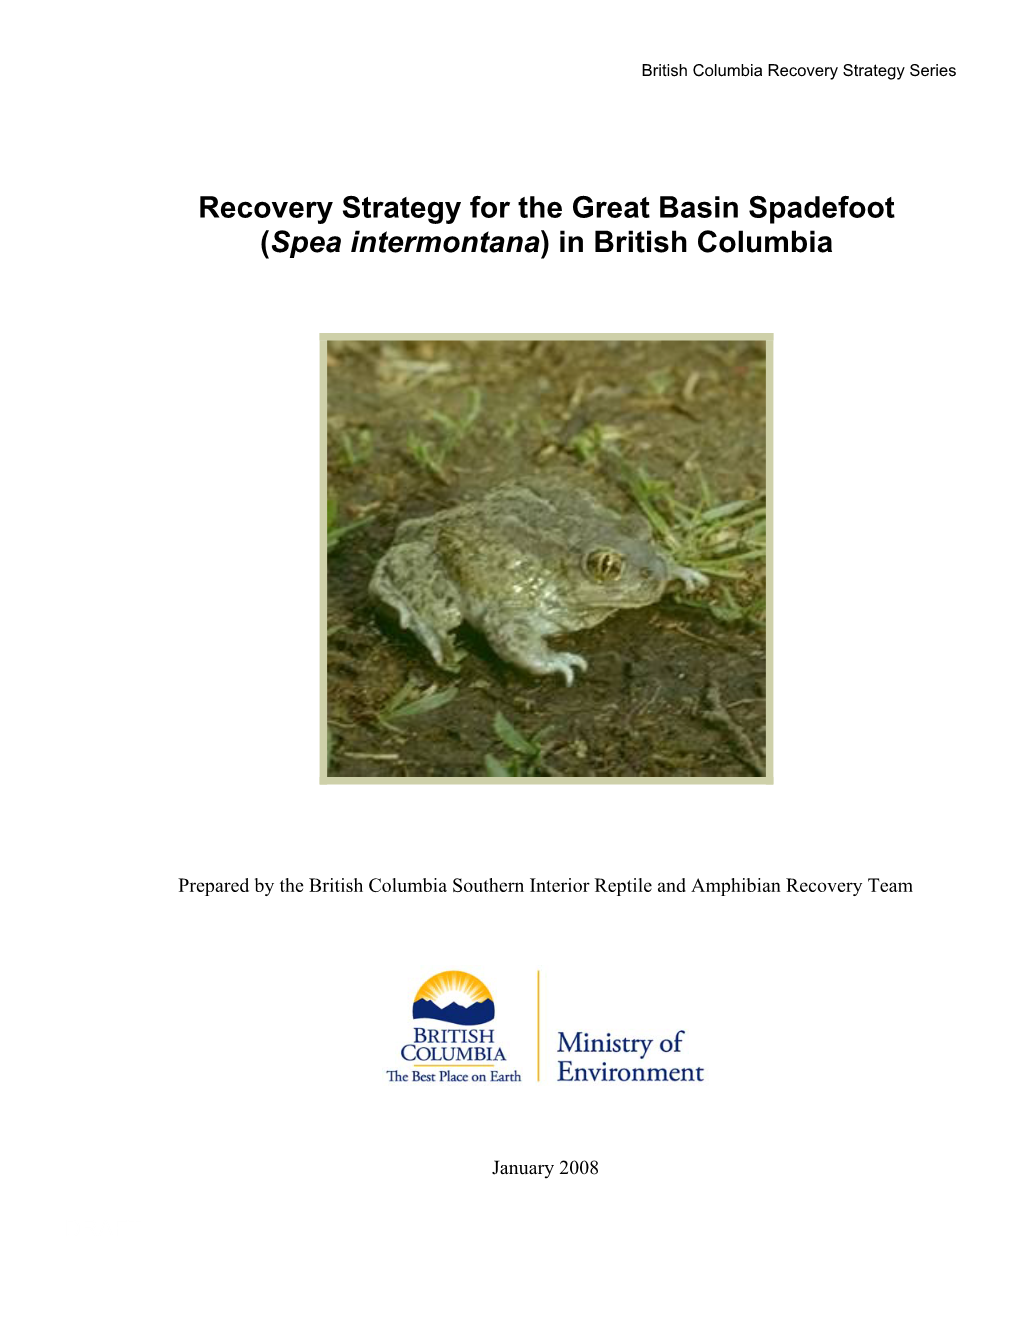 Recovery Strategy for the Great Basin Spadefoot (Spea Intermontana) in British Columbia